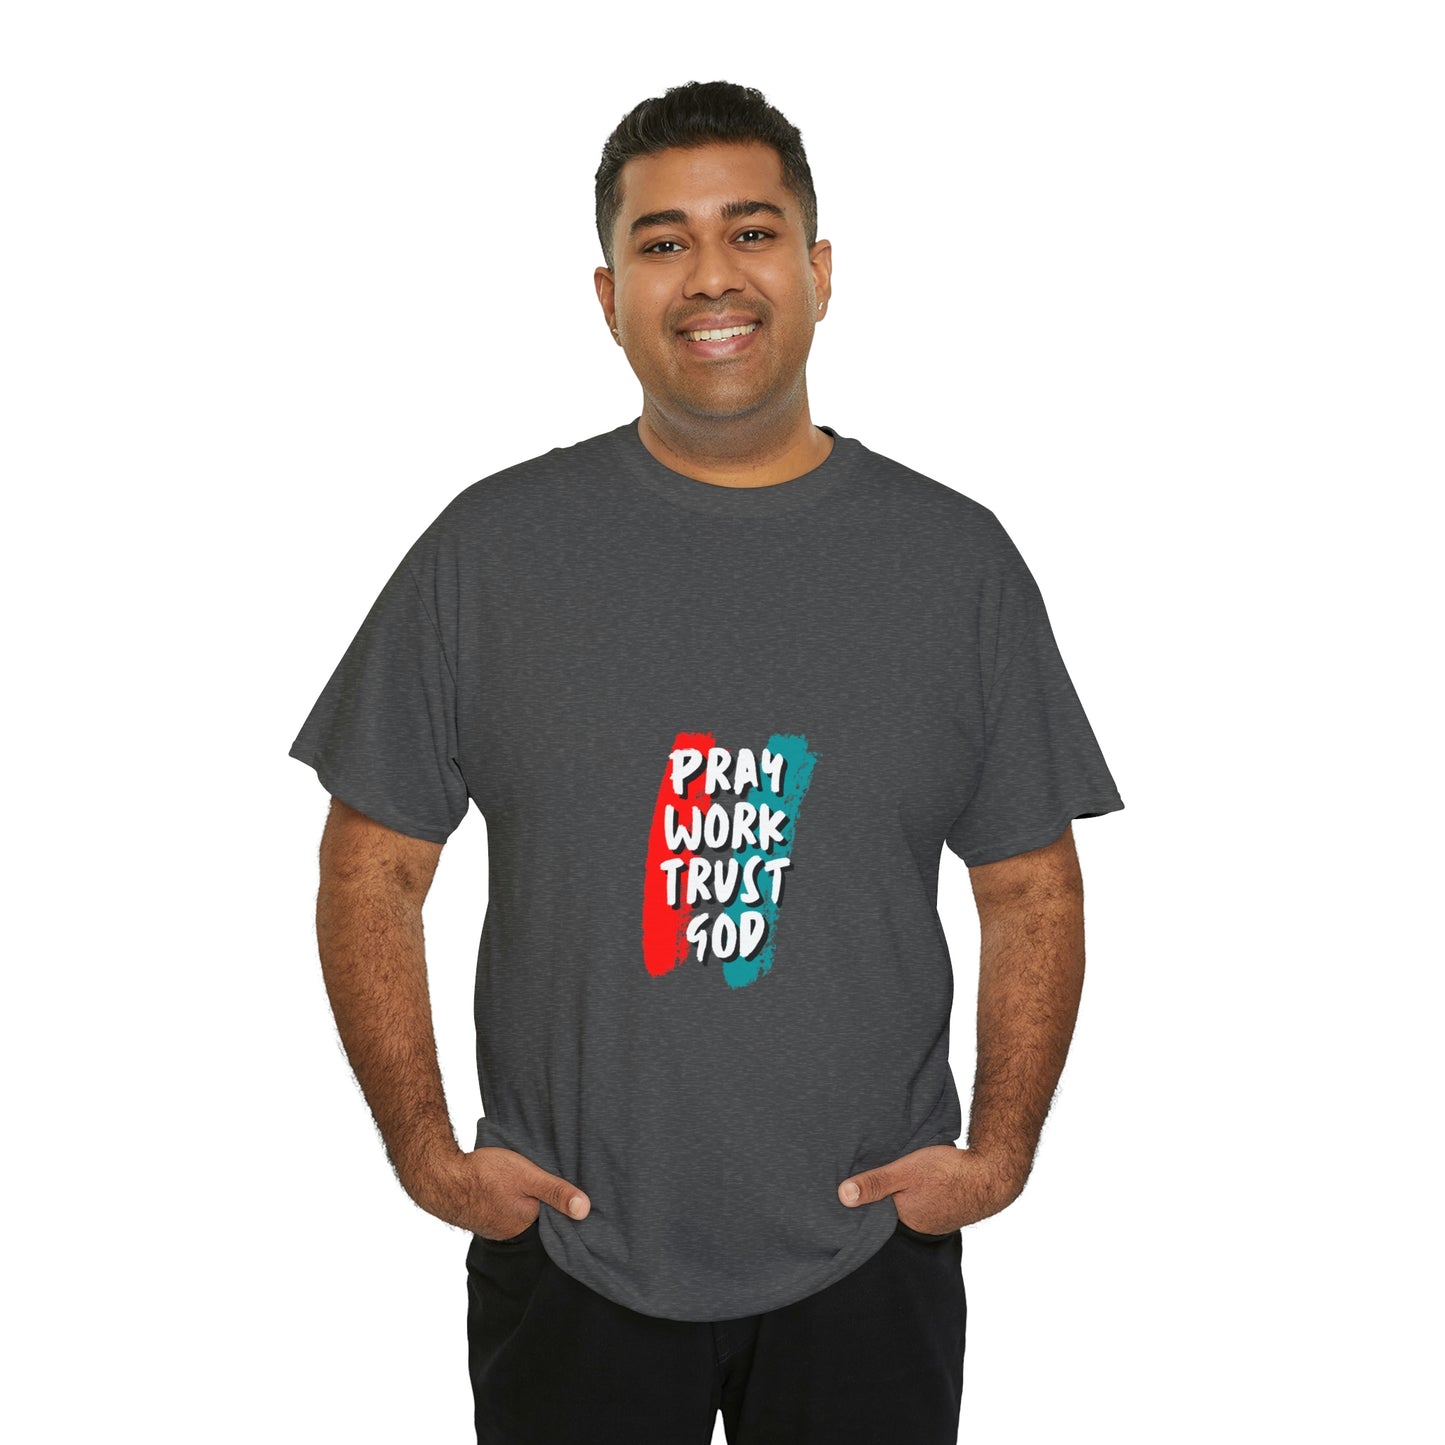 Pray works trust God Your Style  Our Custom Printed Tee Unique Design Comfortable Fit  Personalized for You.  color, funny tshirt tee shirt